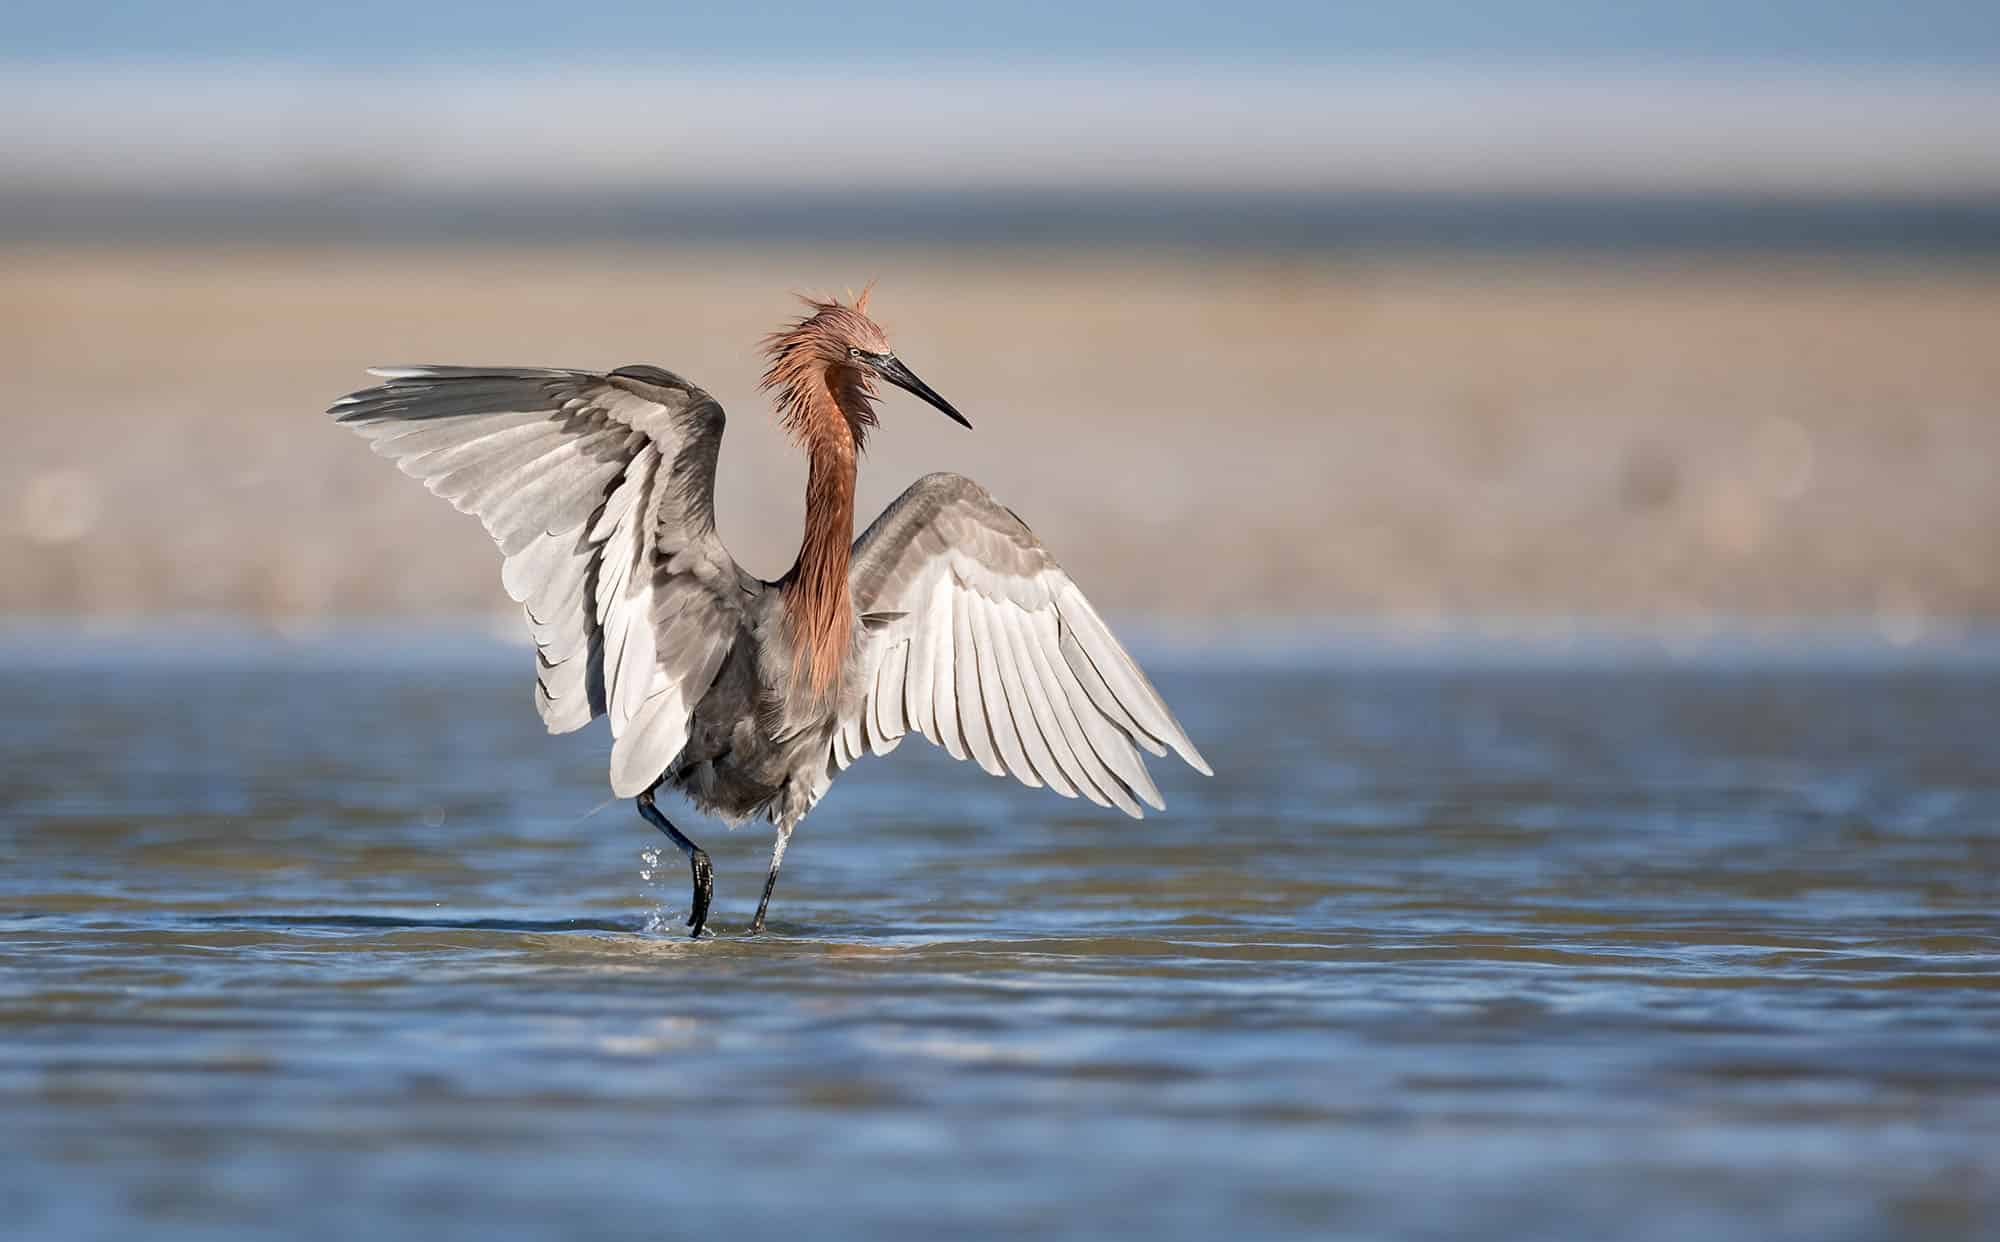 Reddish egret with wings spread